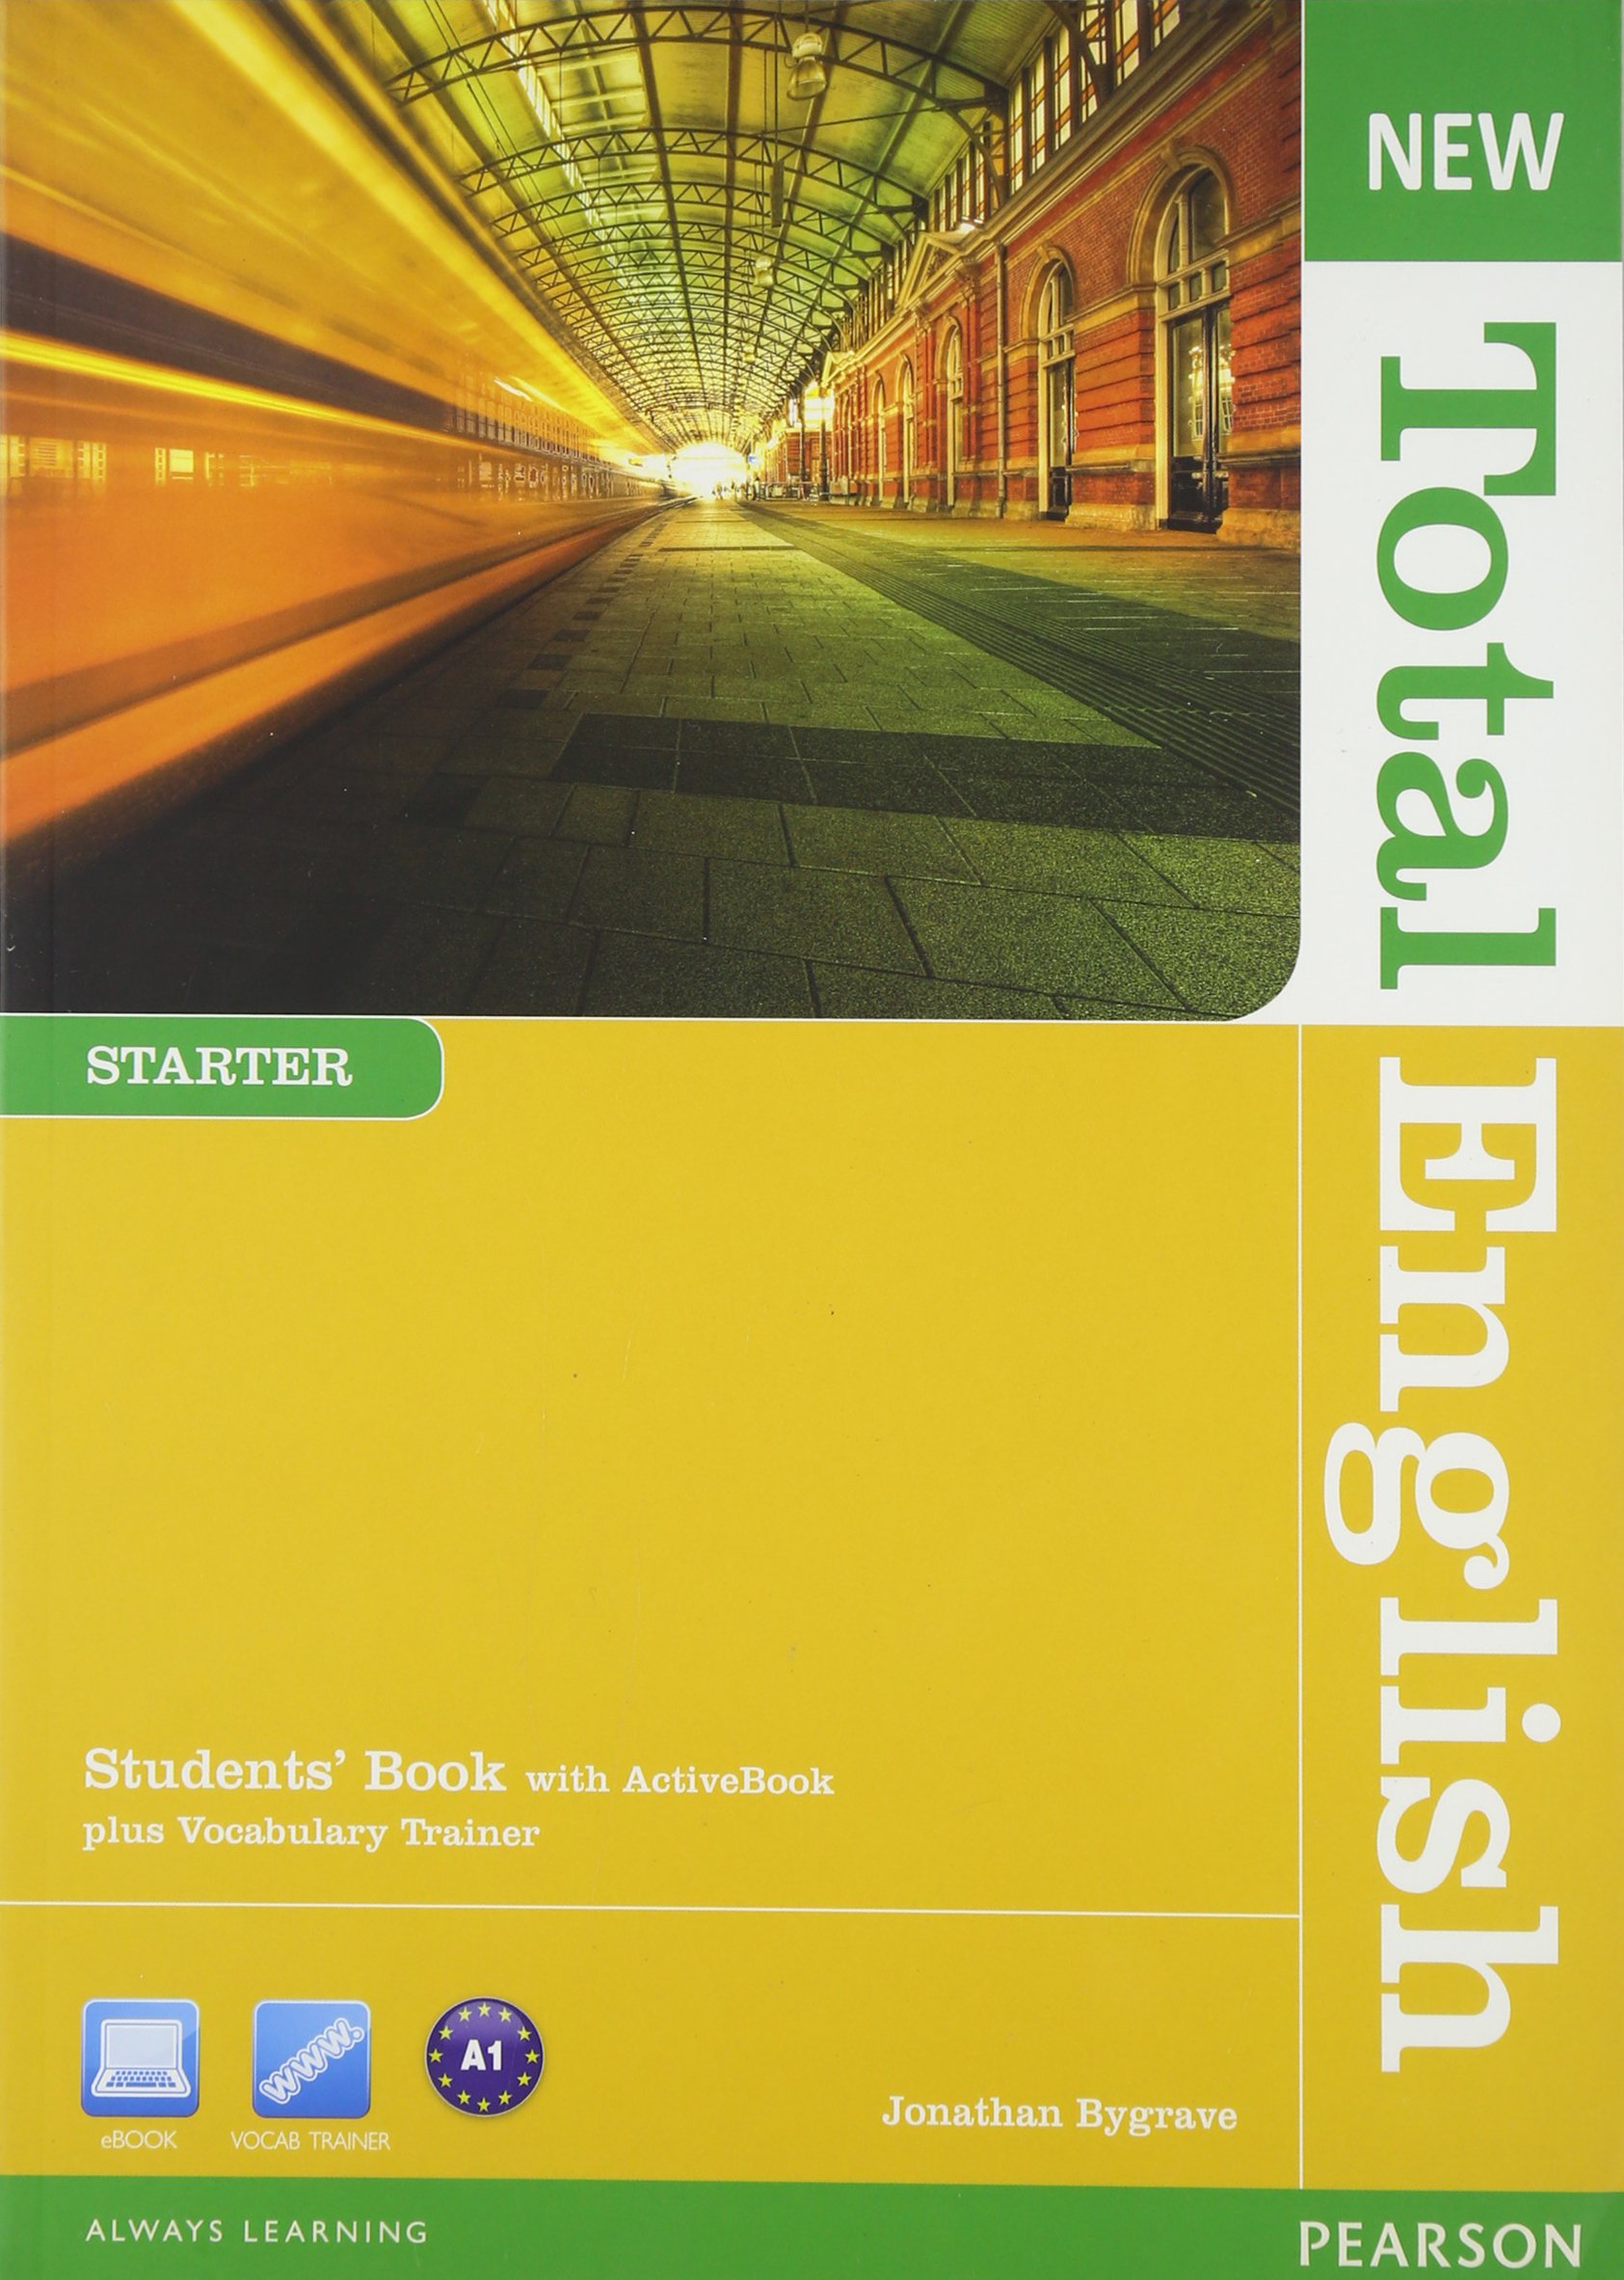 NEW TOTAL ENGLISH STARTER Student's  Book+ DVD+Active book